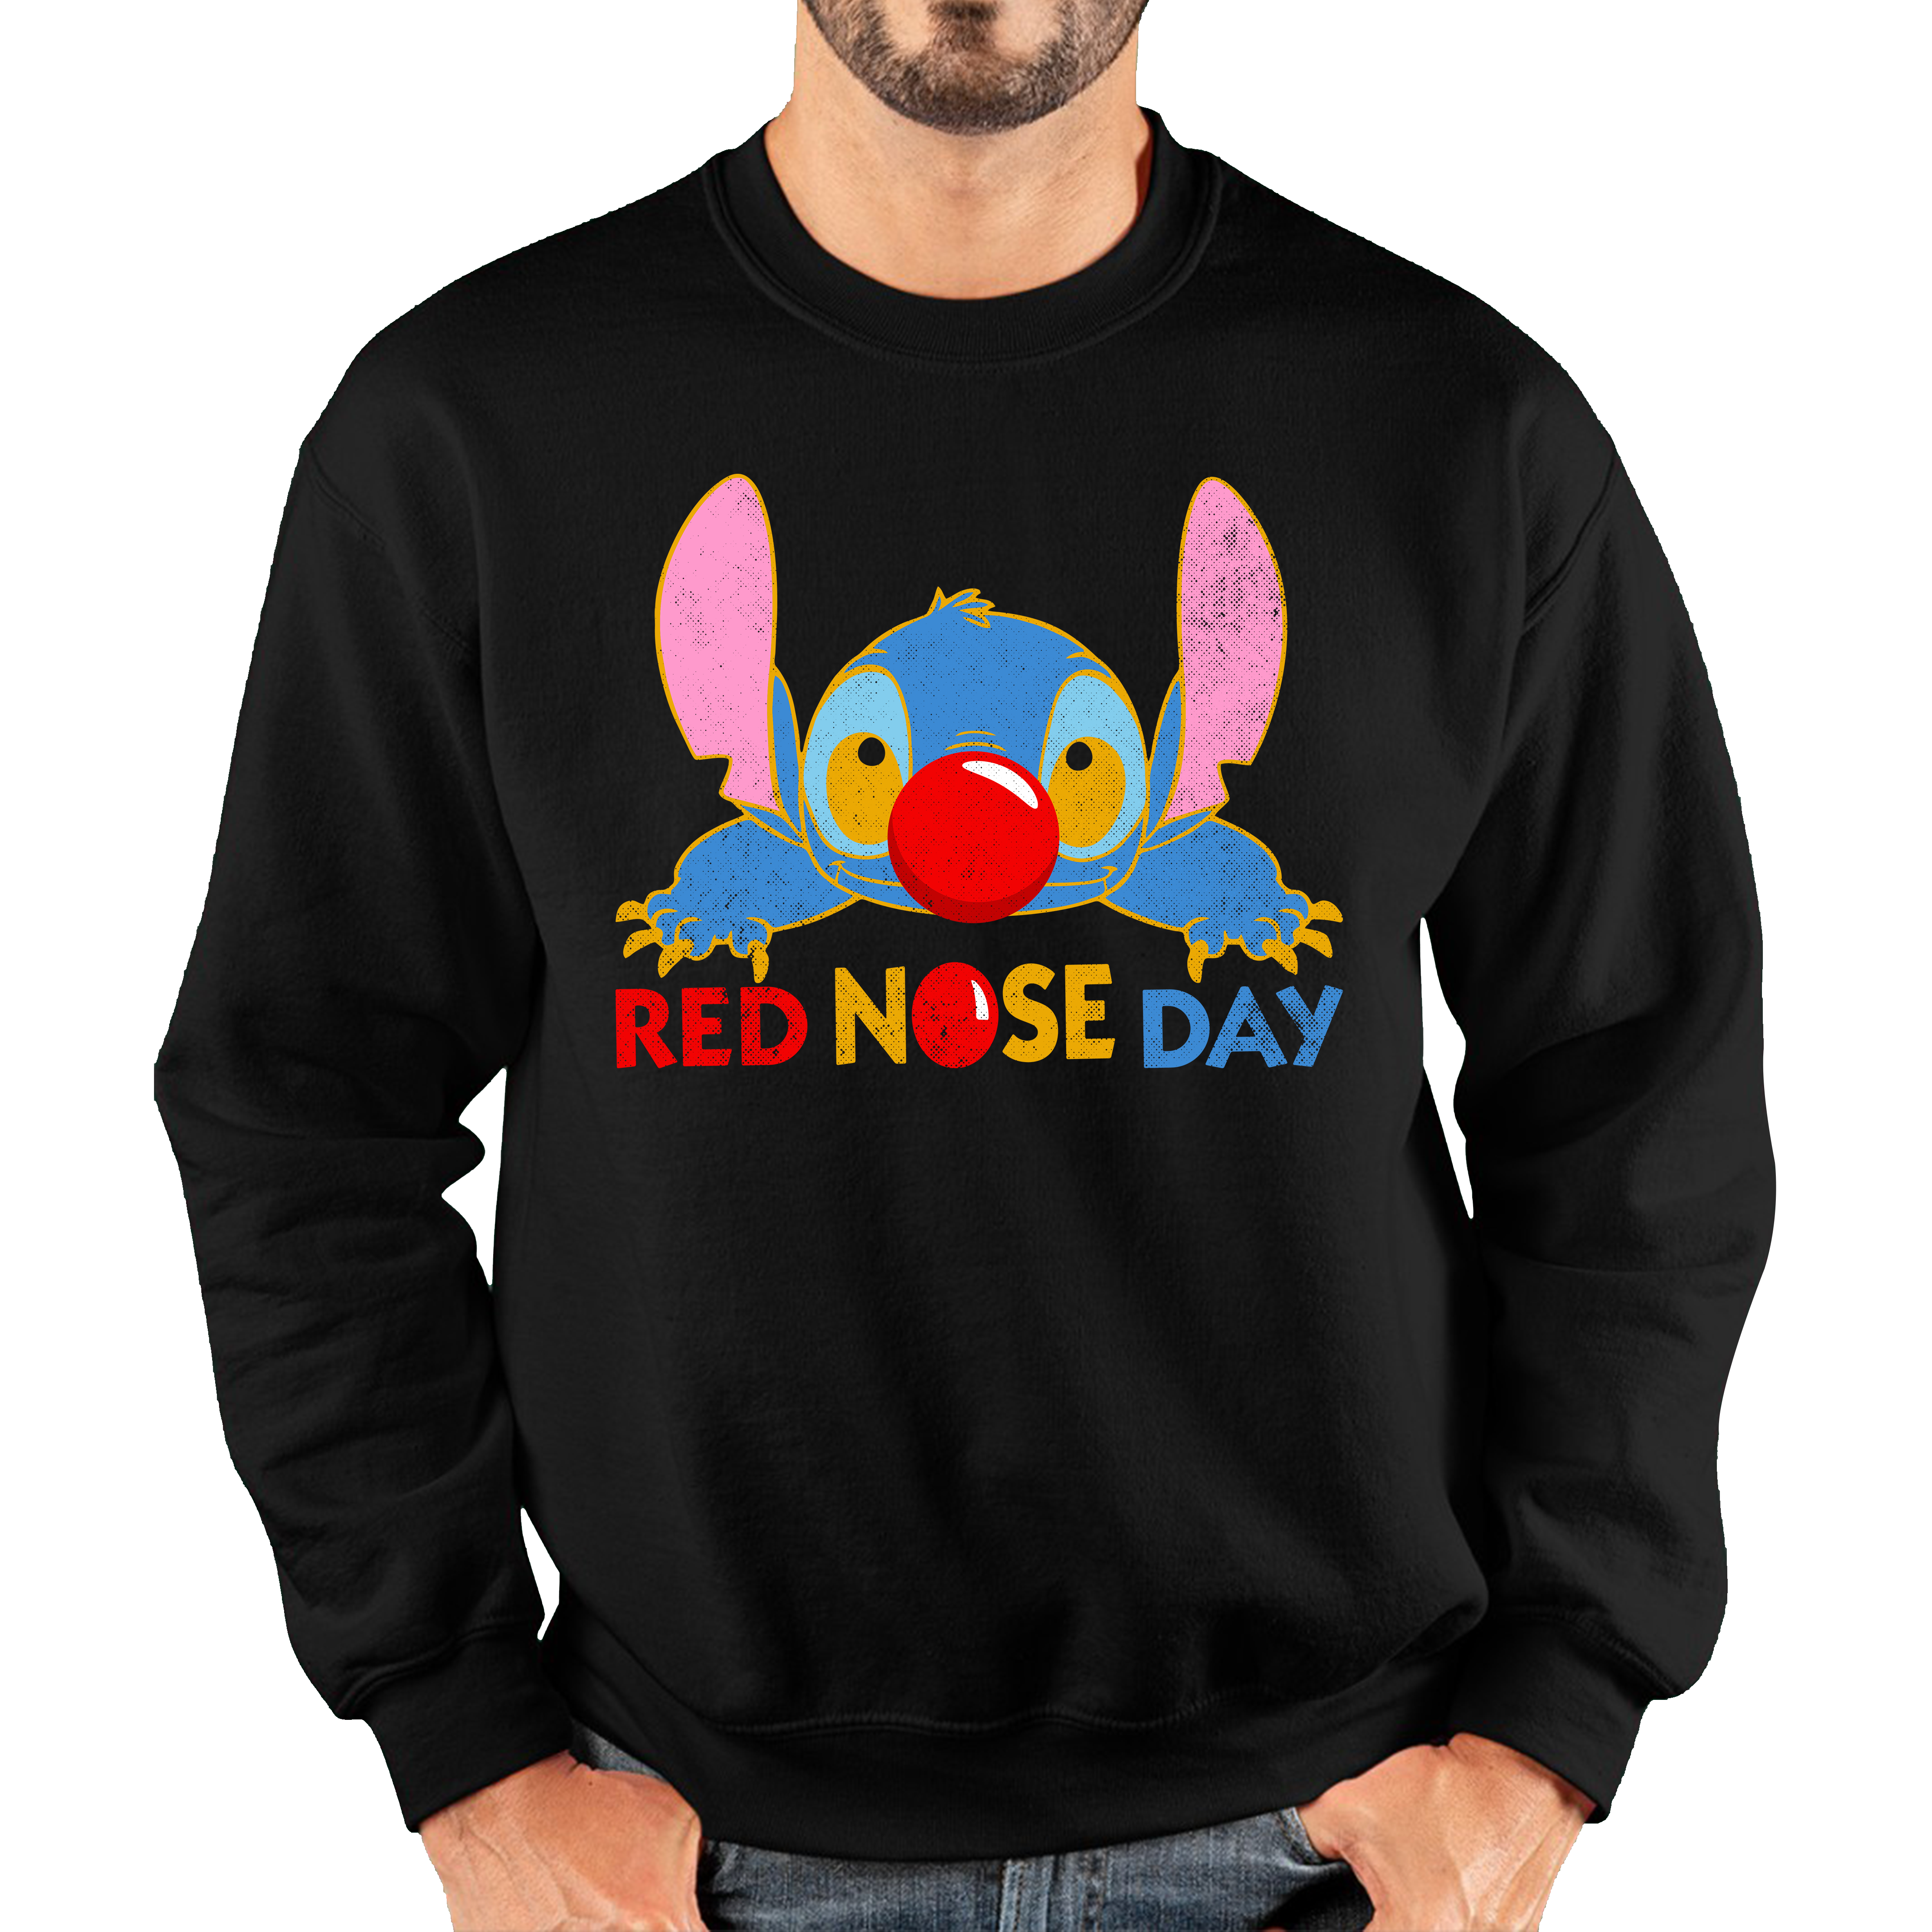 Disney Stitch Red Nose Day Jumper Top Ohana Red Nose Day Funny Adult Sweatshirt. 50% Goes To Charity